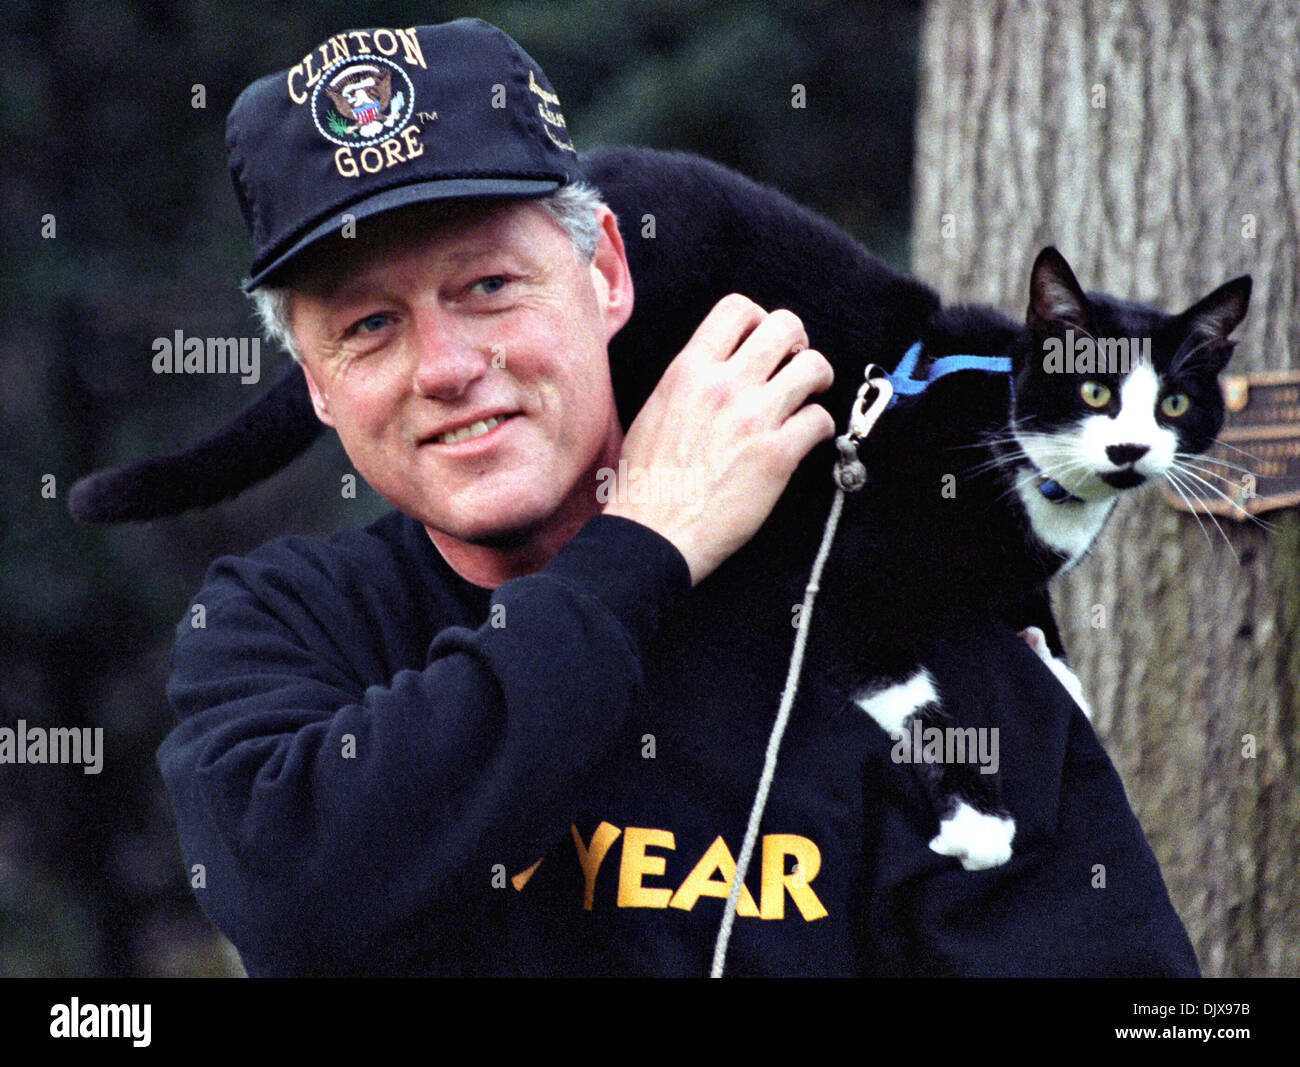 US President Bill Clinton walks with his cat Socks on his shoulder on the South Lawn of the White House December 20, 1993 in Washington, DC. Stock Photo